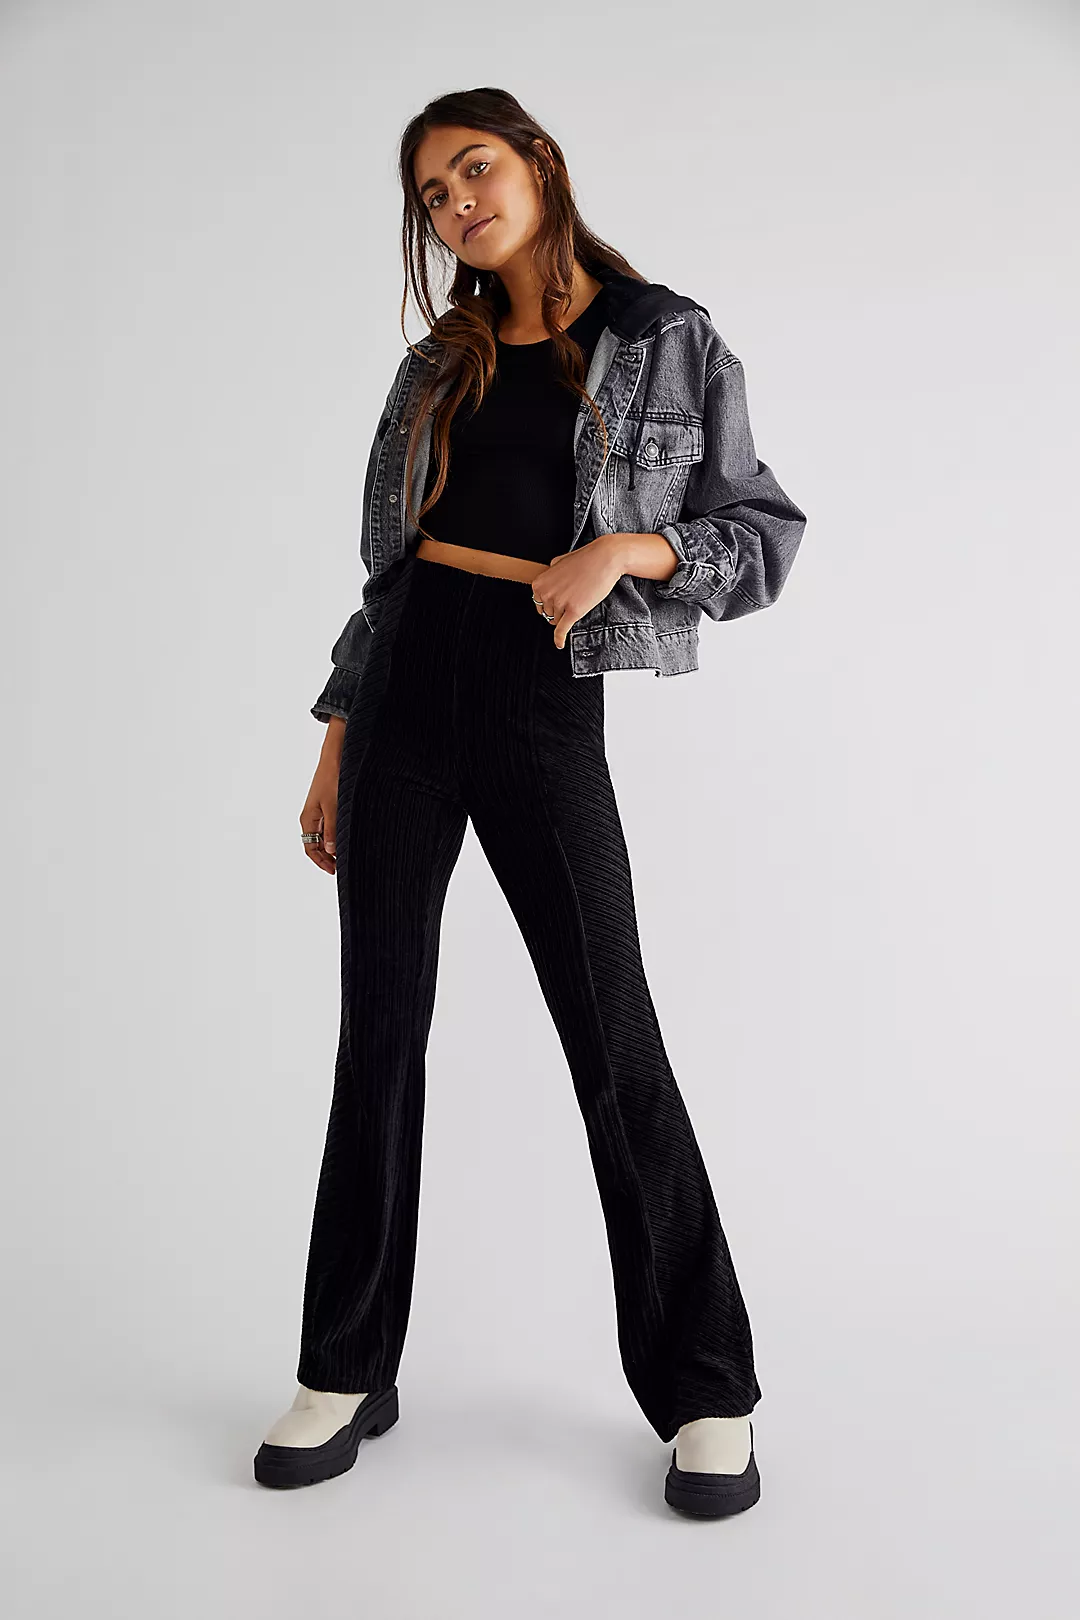 An Honest Review of Free People's Velvet Pull-On Flares